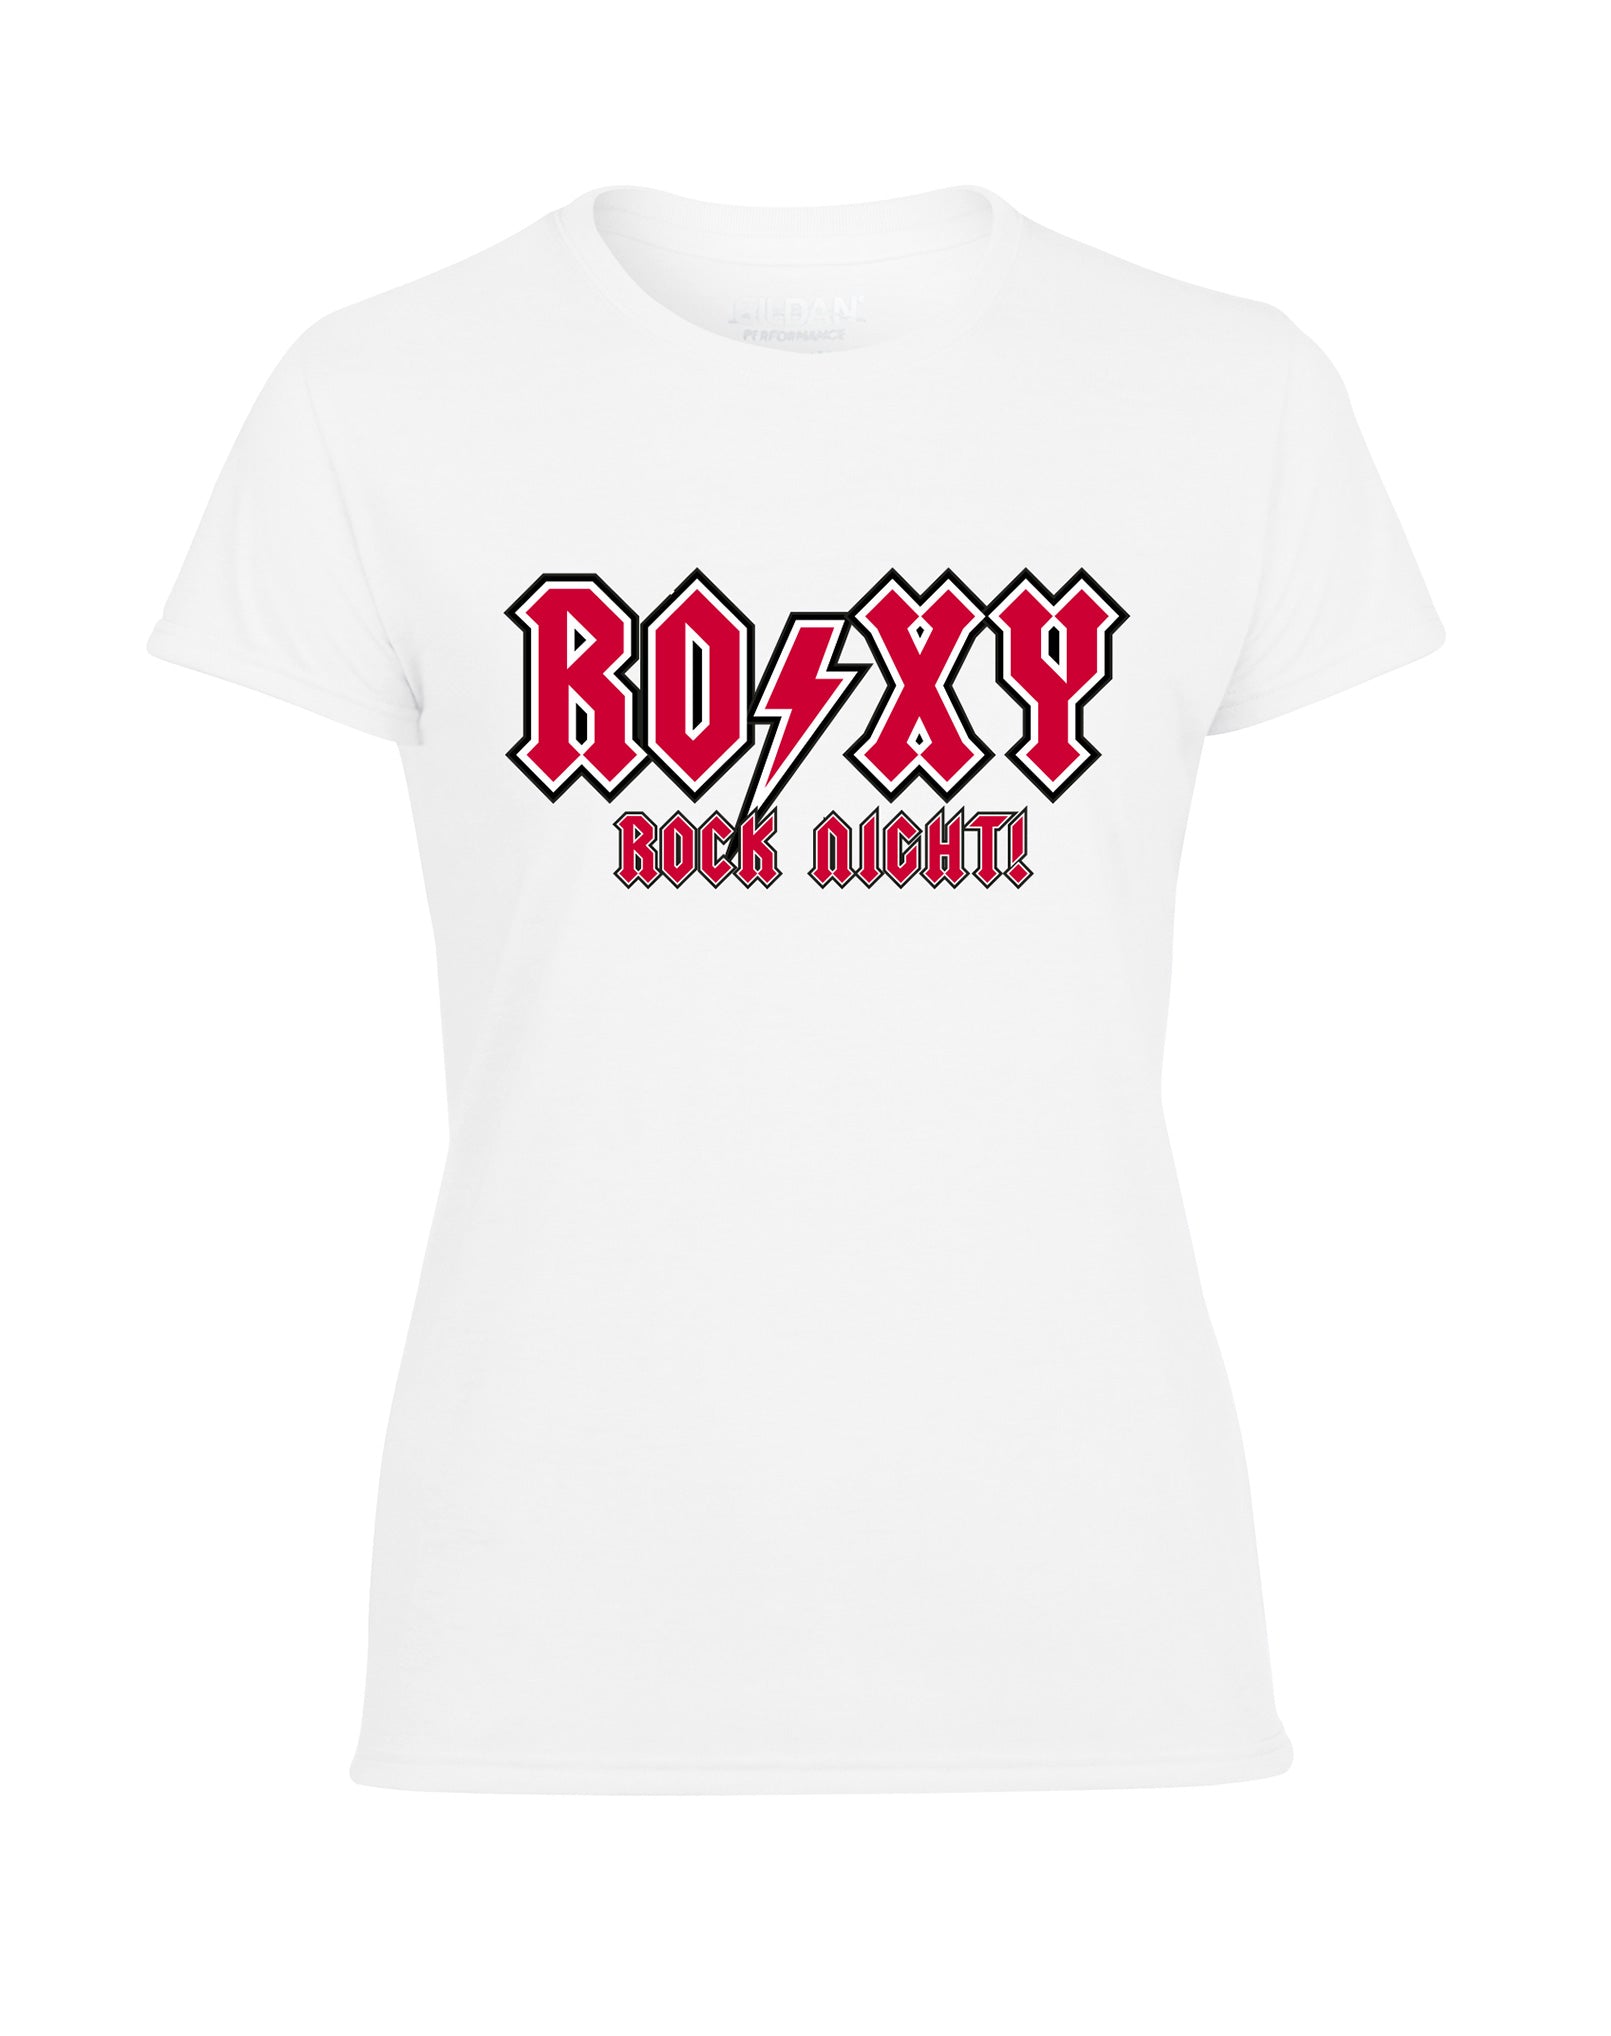 Roxy Rock Night ladies fit T-shirt - various colours - Dirty Stop Outs